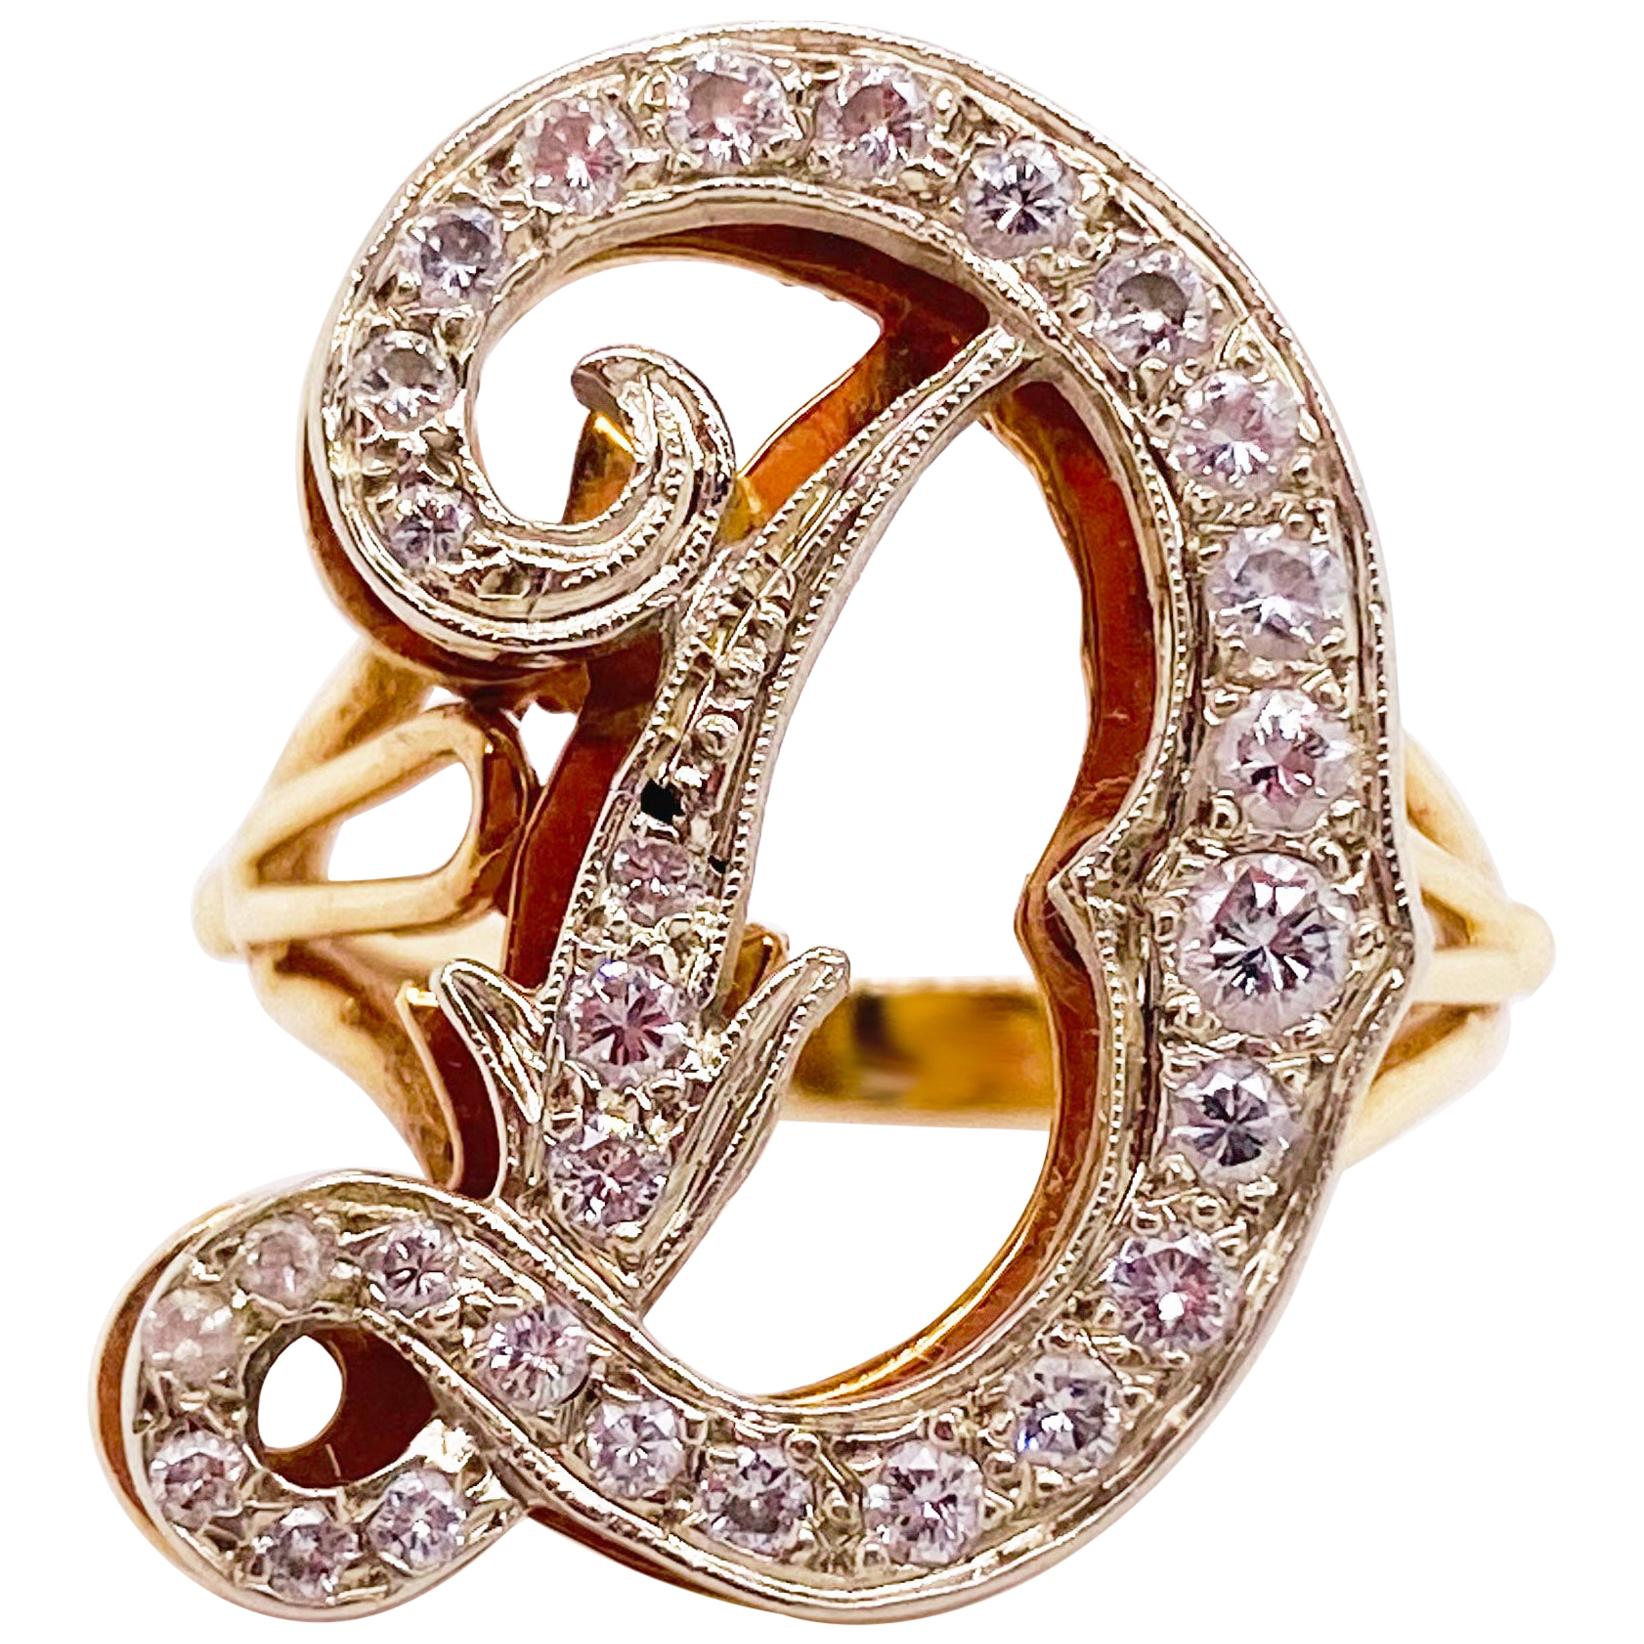 Initial Diamond Ring, Letter D Ring, White and Yellow Gold, Diva Ring, Diamond D